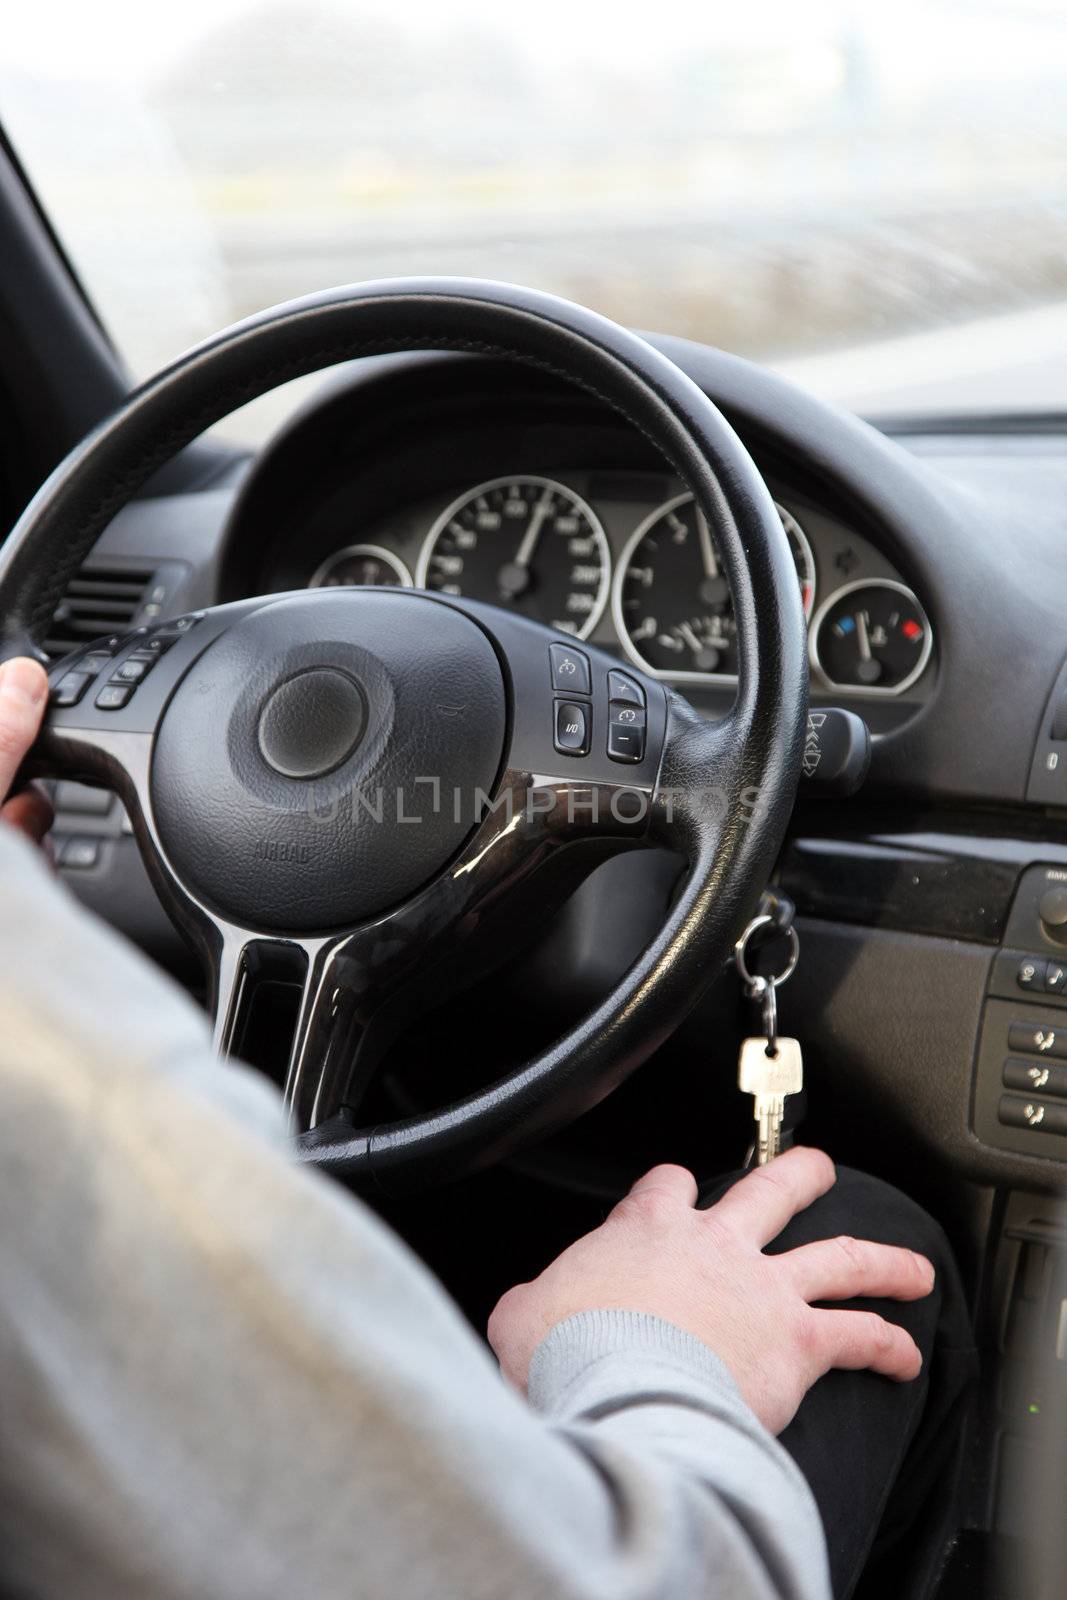 Cropped view over the shoulder image of a man driving a car with one hand on the steering wheel and the other on his knee below the dangling ignition key Cropped view overthe shoulder image of a man driving a car with one hand on the steering wheel and the other on his knee below the dangling ignition key - no discernable view through the windscreen